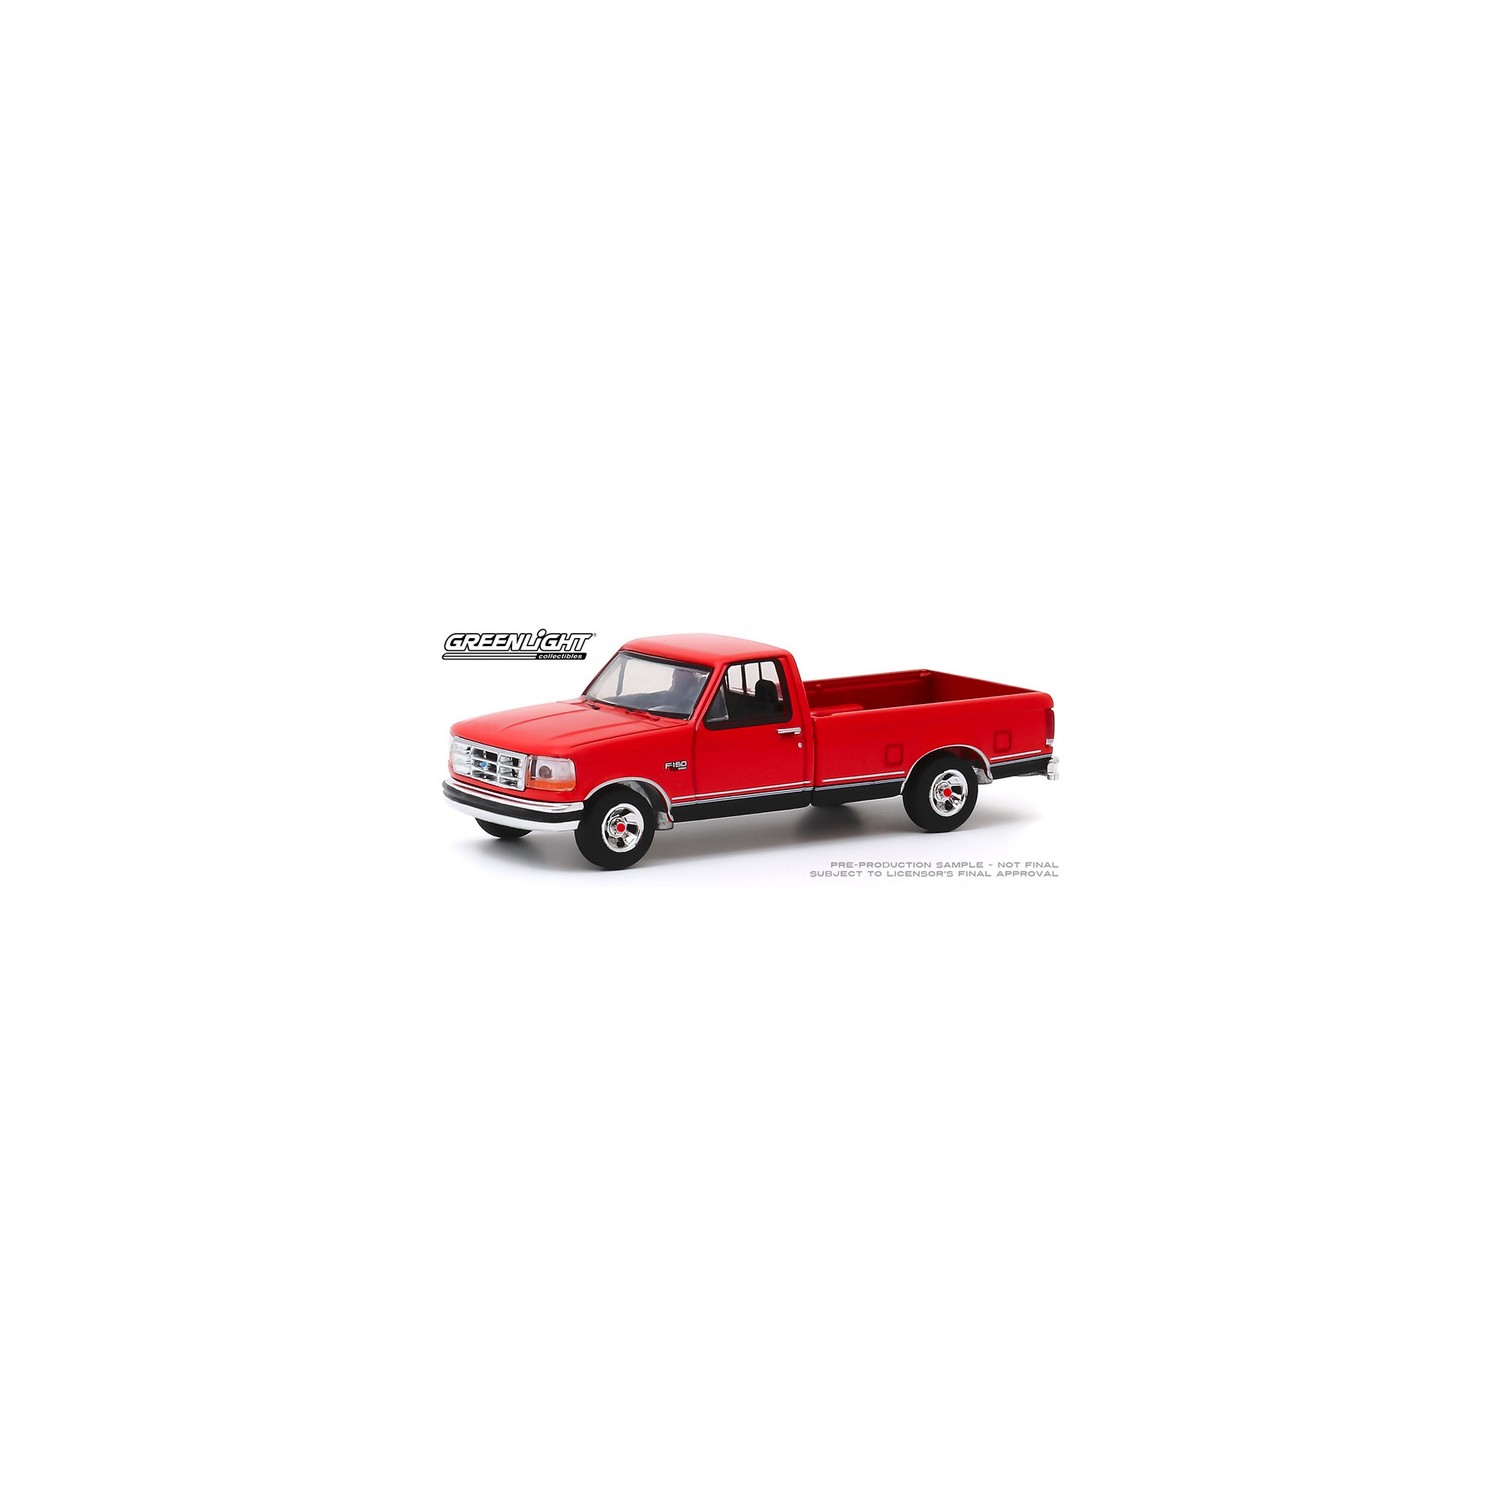 GREENLIGHT 28020 D ANNIVERSARY OF FORD TRUCKS 1992 FORD F-150 PICK UP 1/64 Chase 